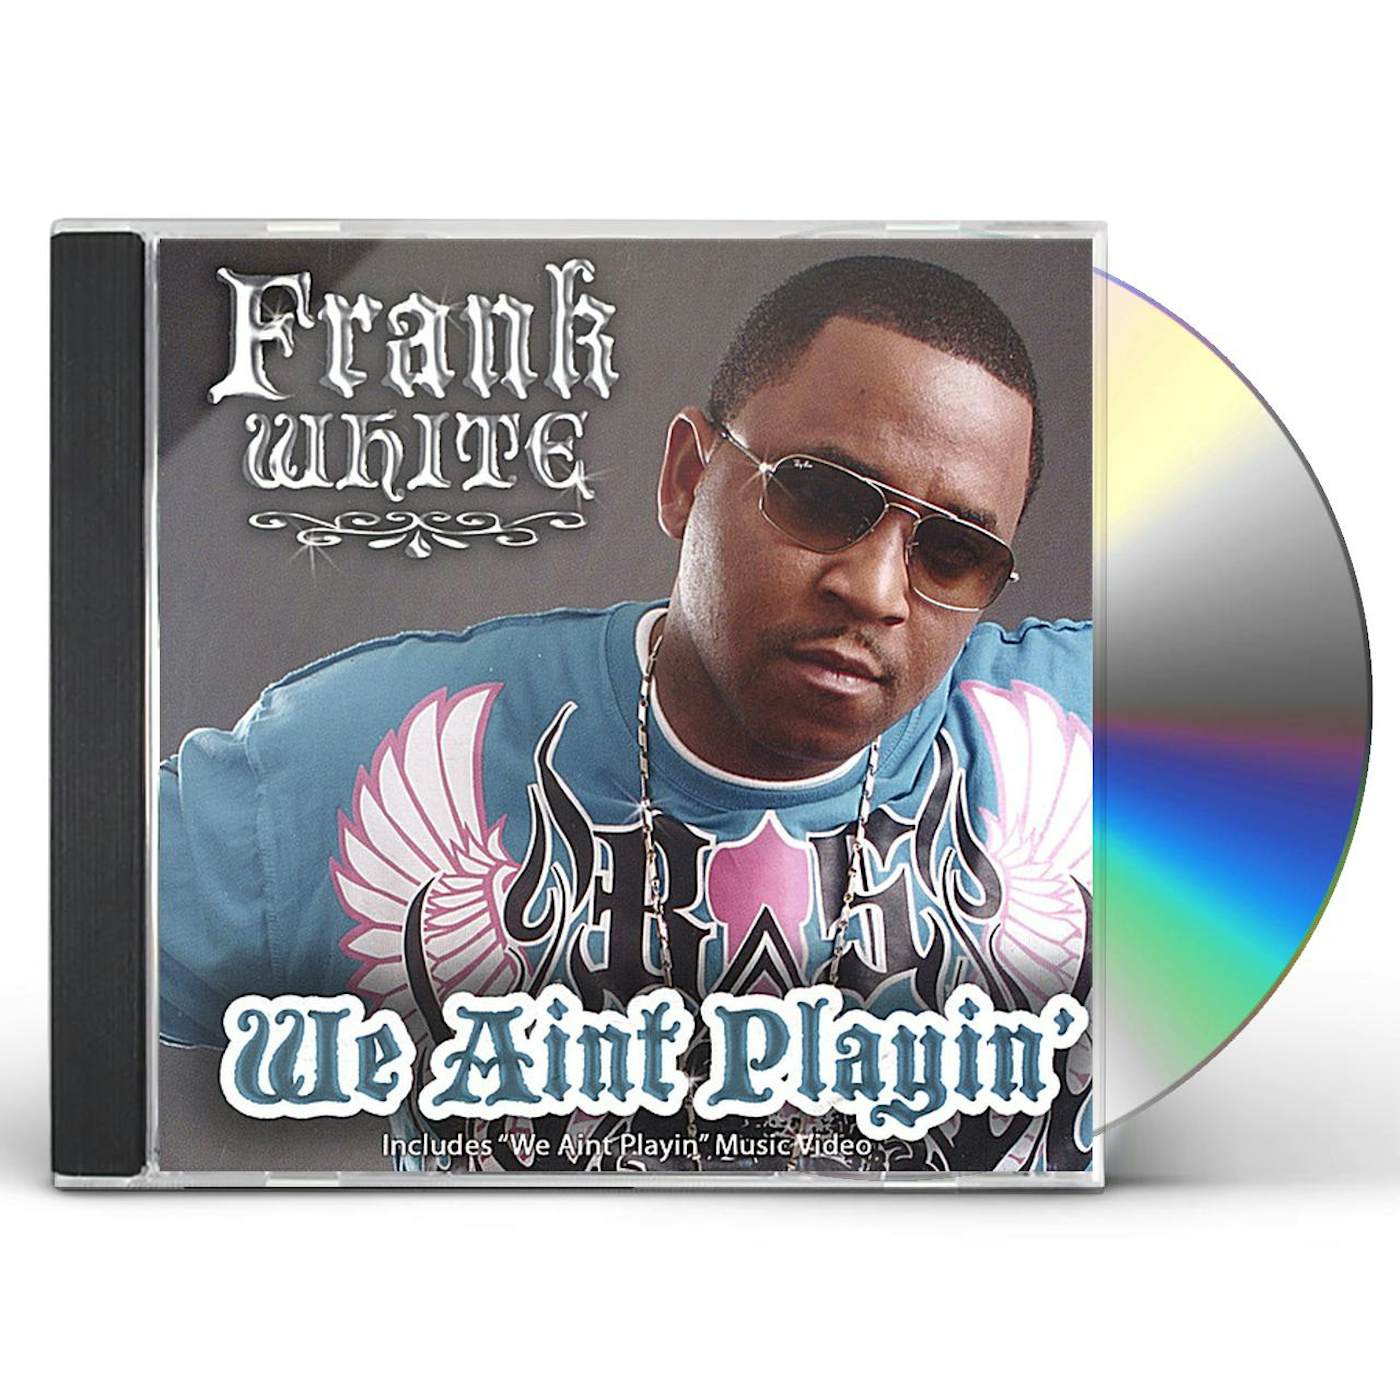 Frank White WE AINT PLAYIN' (INCLUDES ENHANCED MUSIC VIDEO) CD